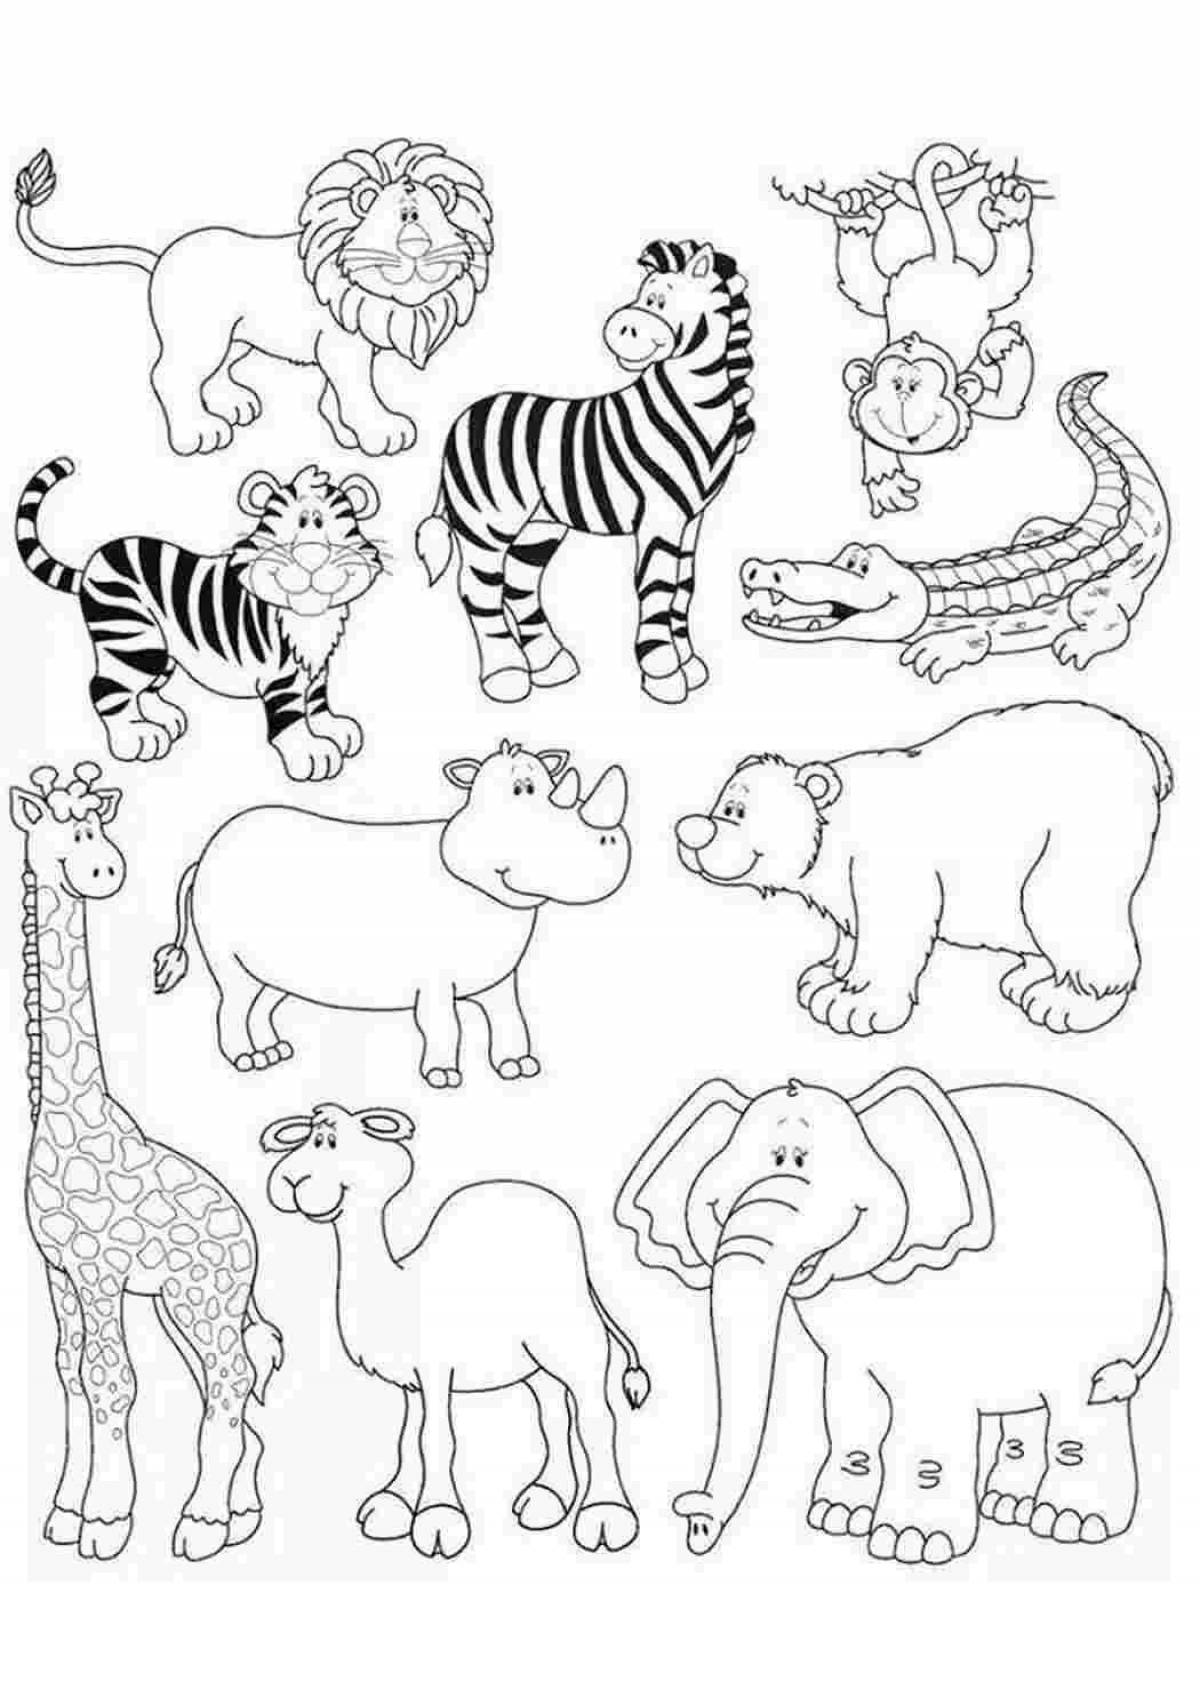 Playful coloring animals of hot countries for children 6-7 years old